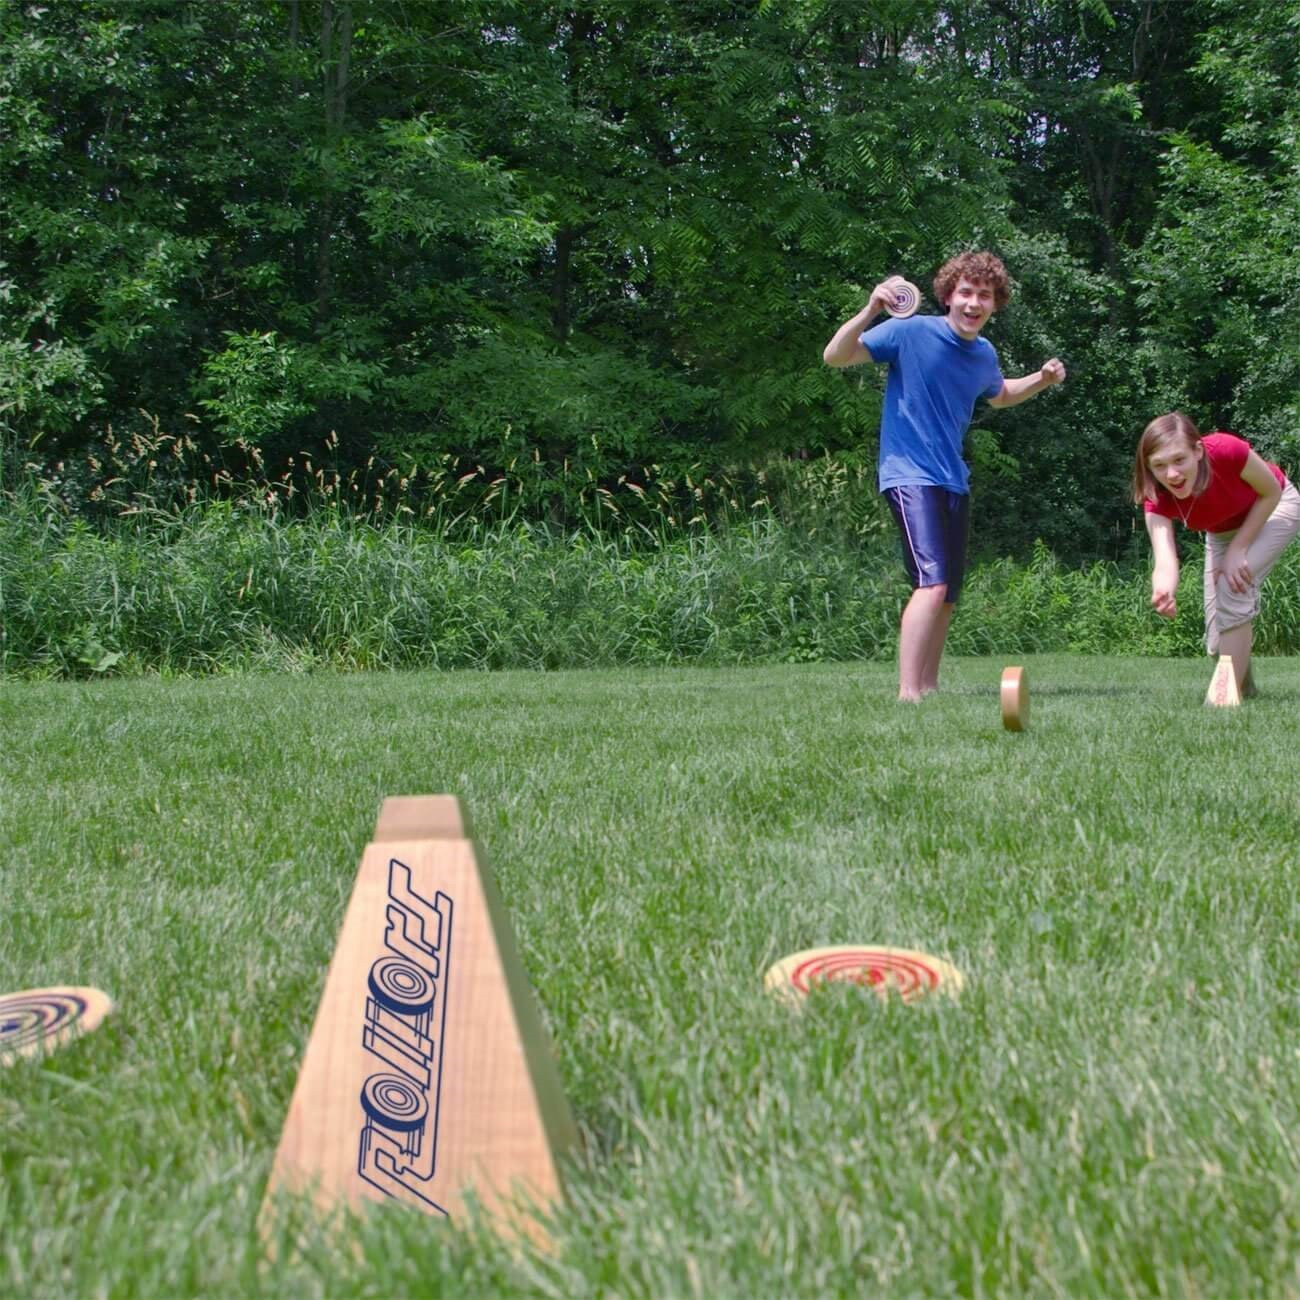 Backyard Video Games
 Top 10 Backyard Party Games for All Ages